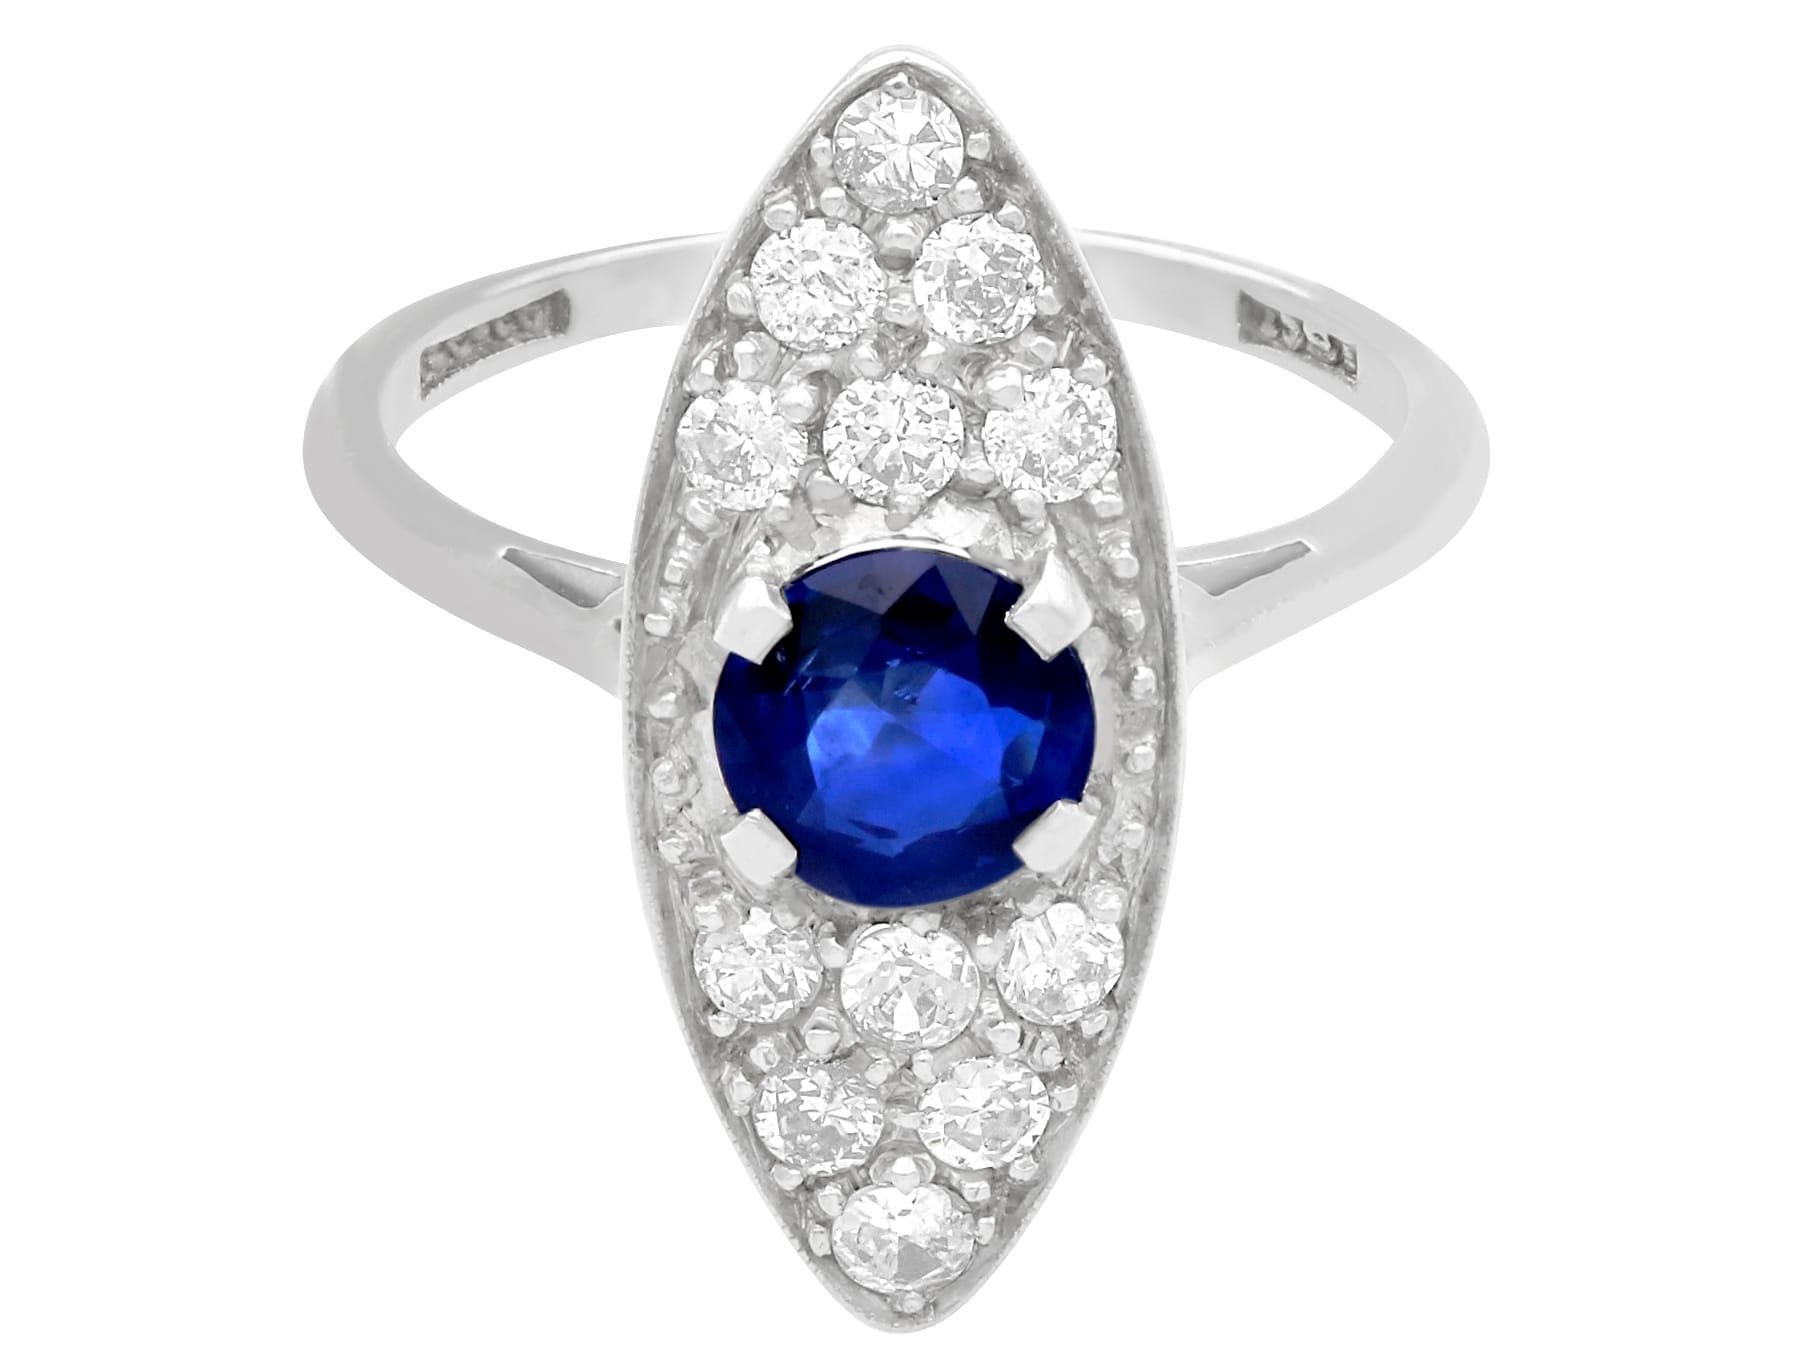 Antique 1920s 1.02 Carat Sapphire and Diamond White Gold Cocktail Ring In Excellent Condition For Sale In Jesmond, Newcastle Upon Tyne